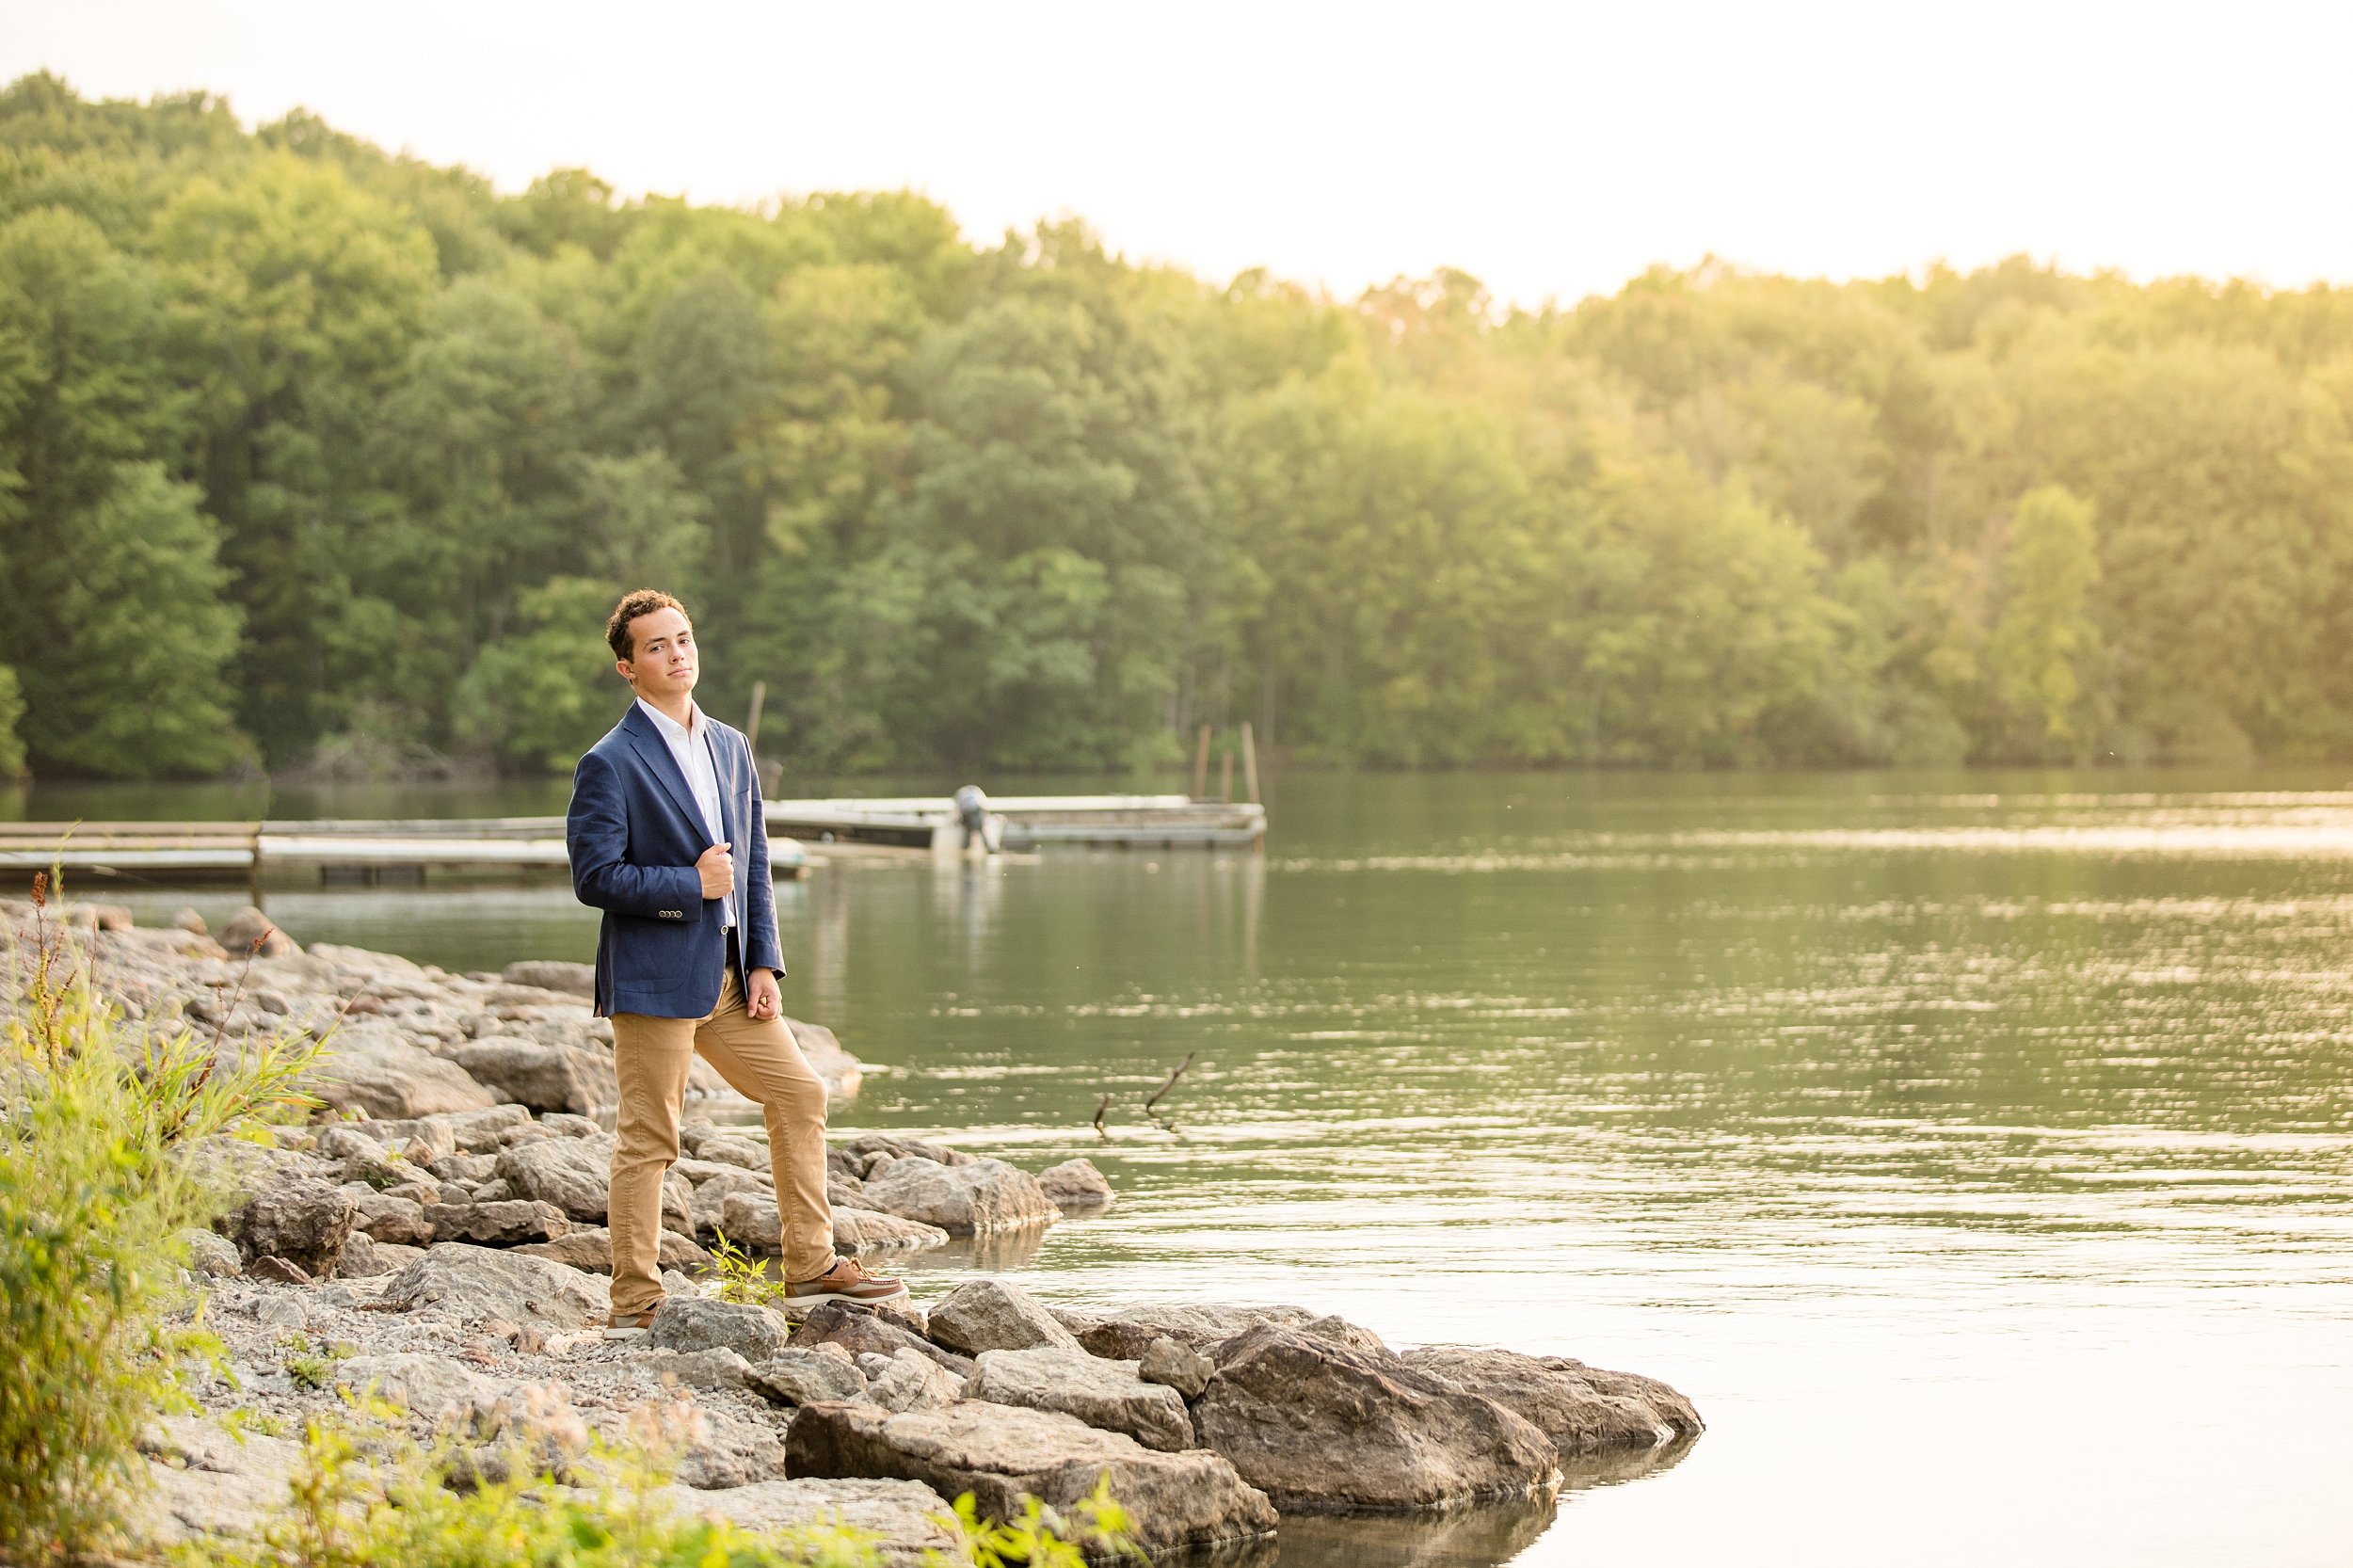 butler county senior photo locations, senior picture location ideas butler county, cranberry township senior photos, zelienople senior photos, mars senior photos, moraine state park senior photos